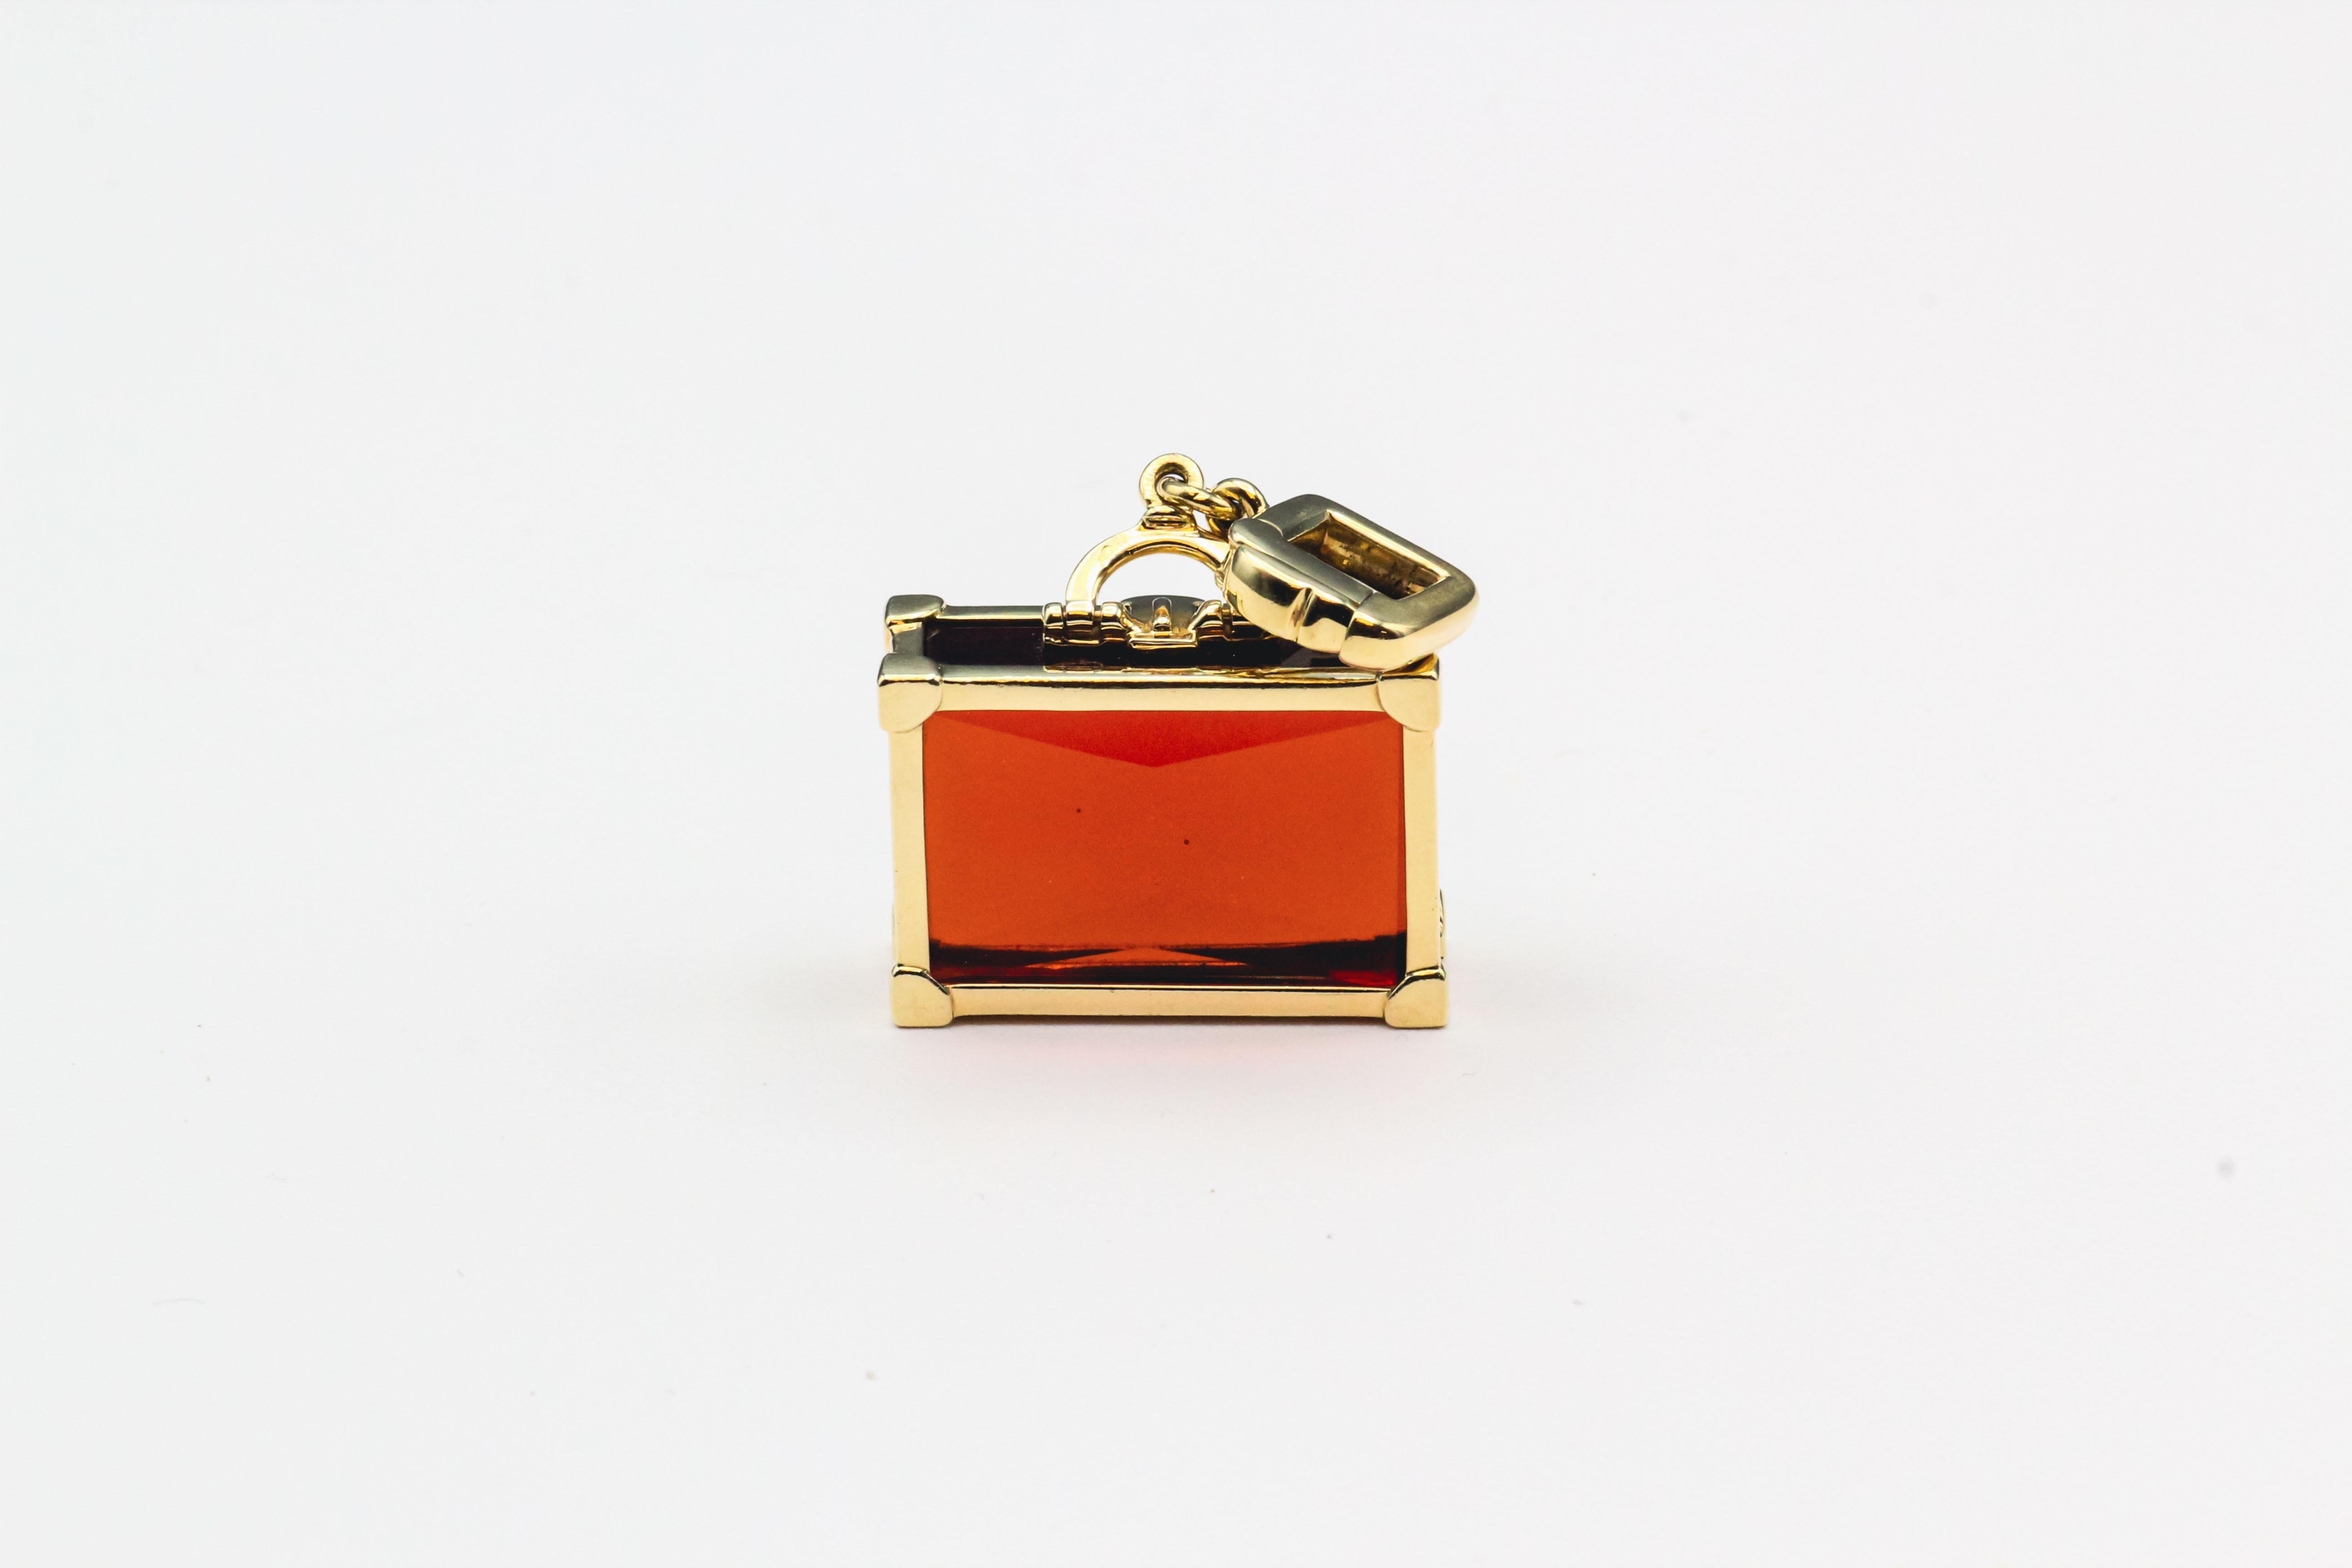 Embark on a journey of luxury and style with the Contemporary Louis Vuitton Citrine and 18k Yellow Gold Suitcase Charm Pendant. This exquisite piece seamlessly blends modern elegance with the timeless allure of travel, showcasing Louis Vuitton's